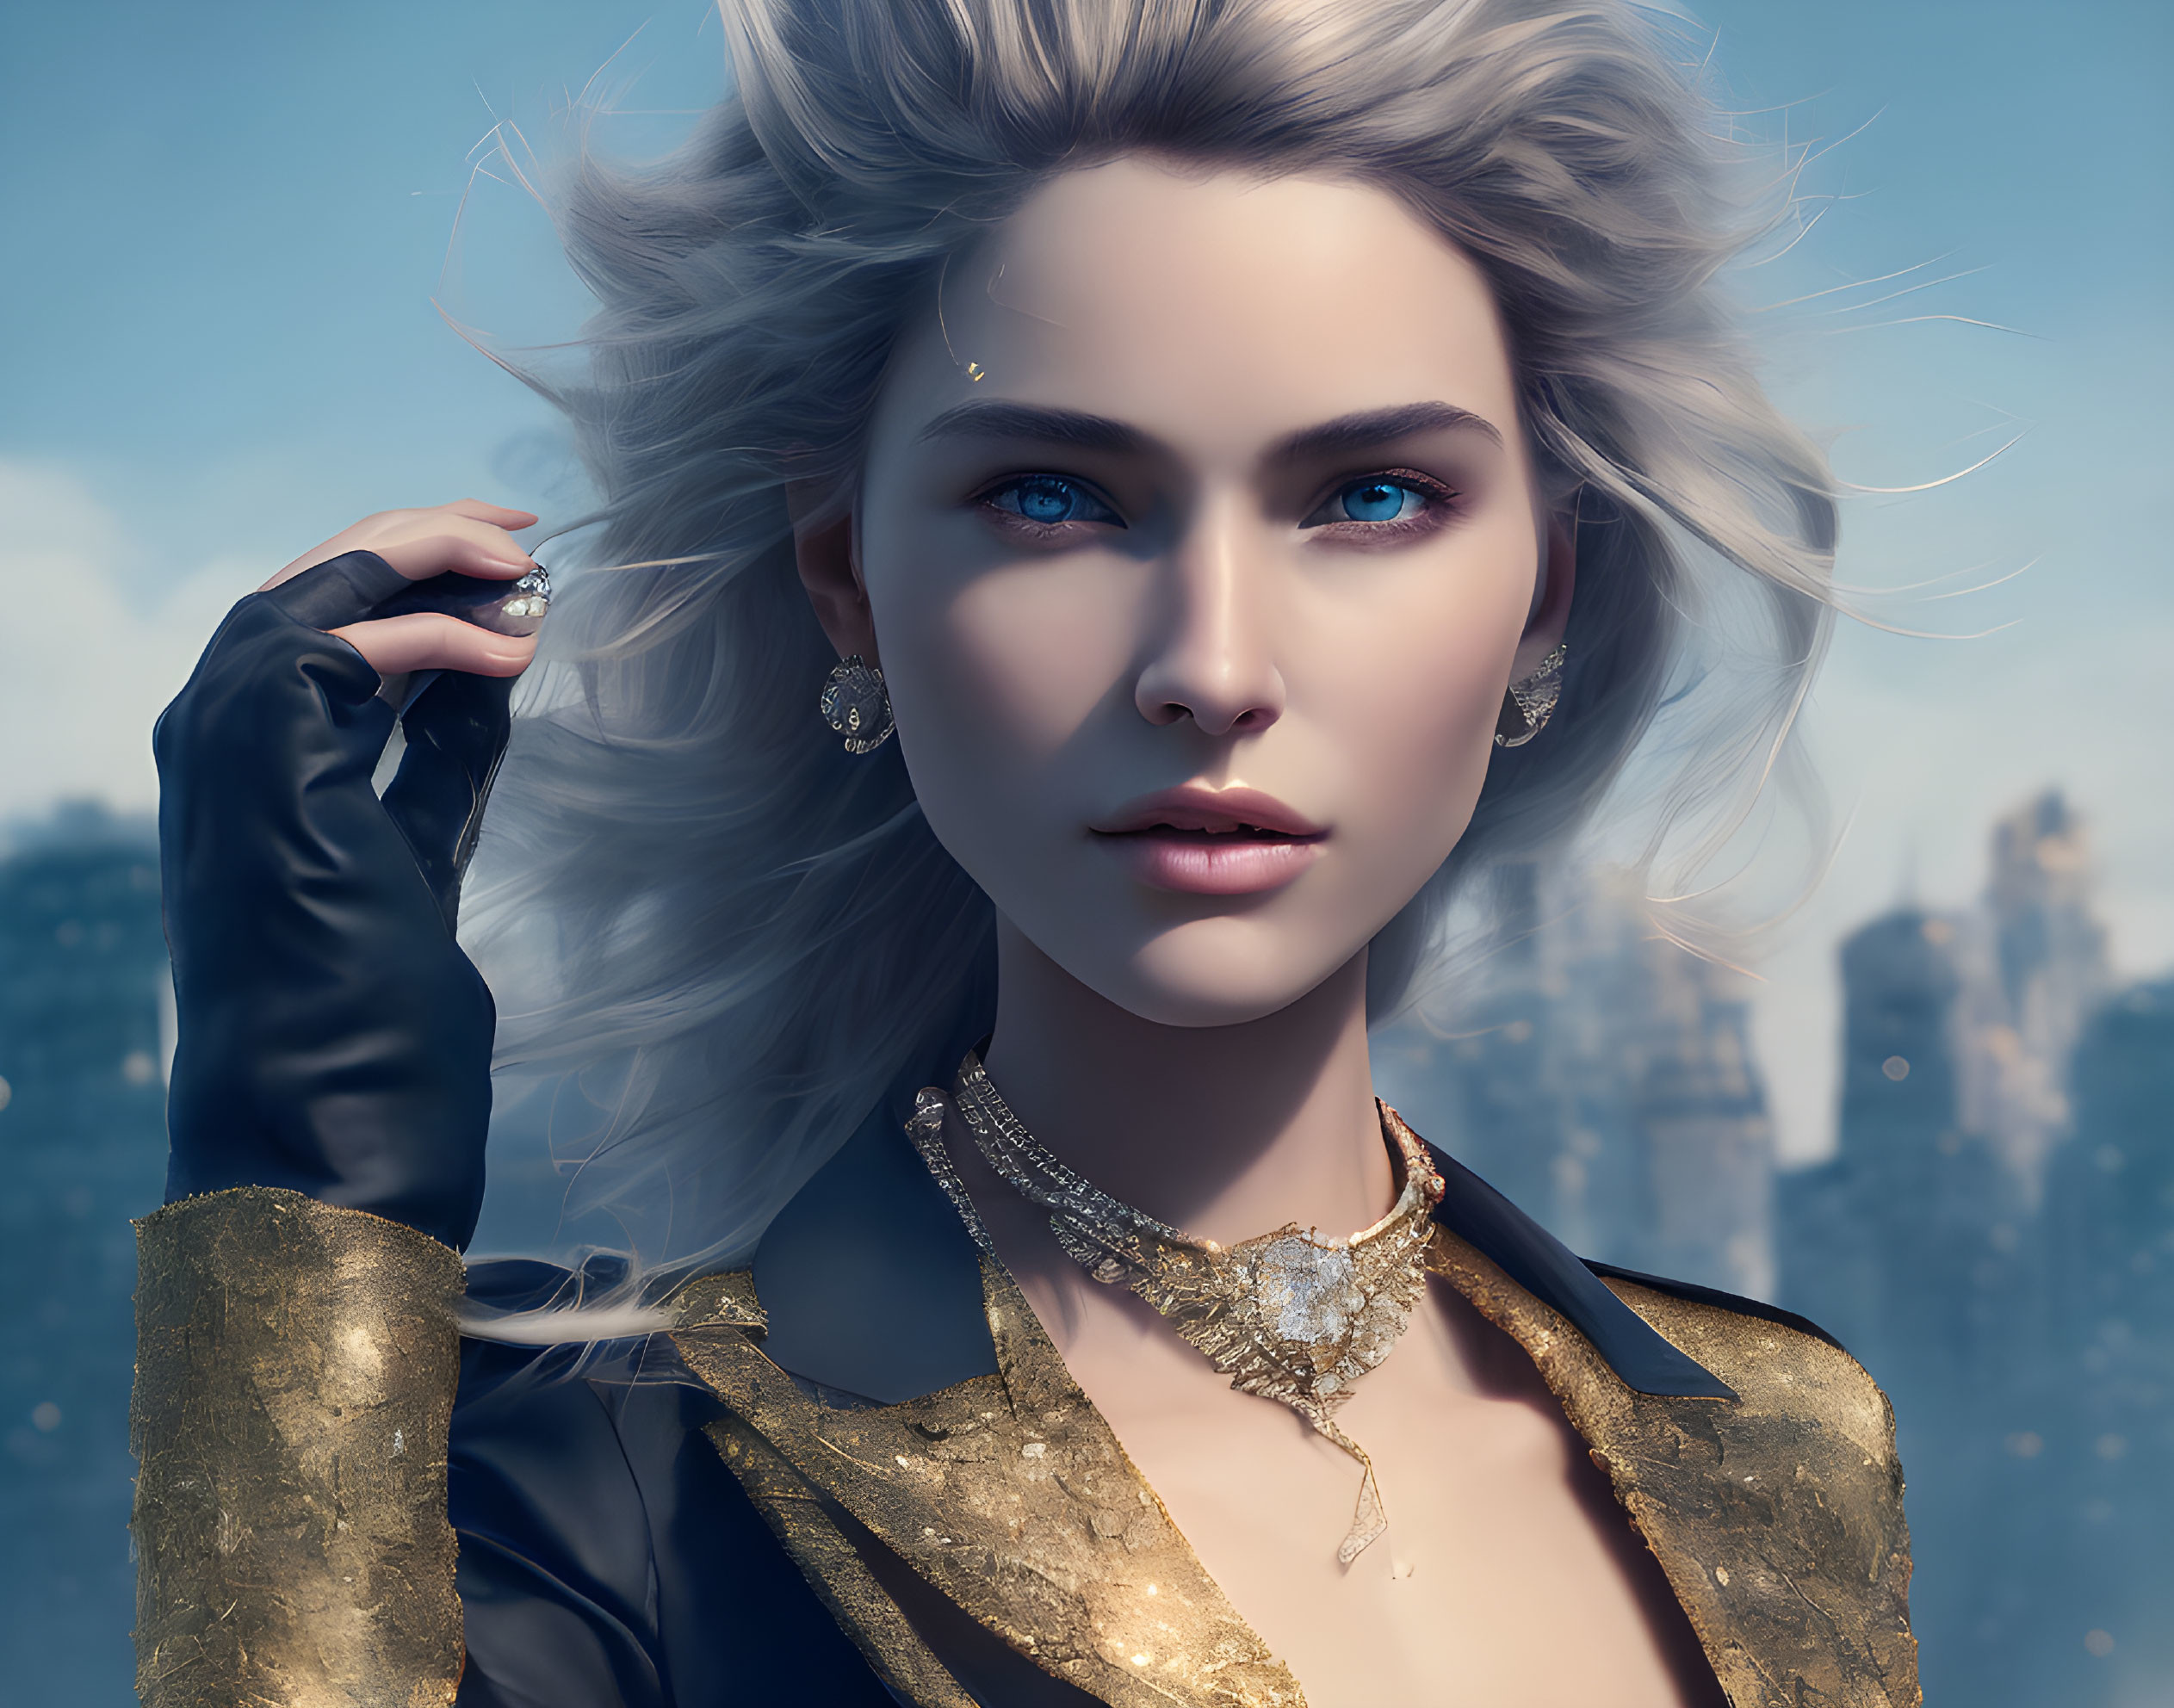 Portrait of woman with blue eyes, blond hair, black and gold jacket, cityscape background